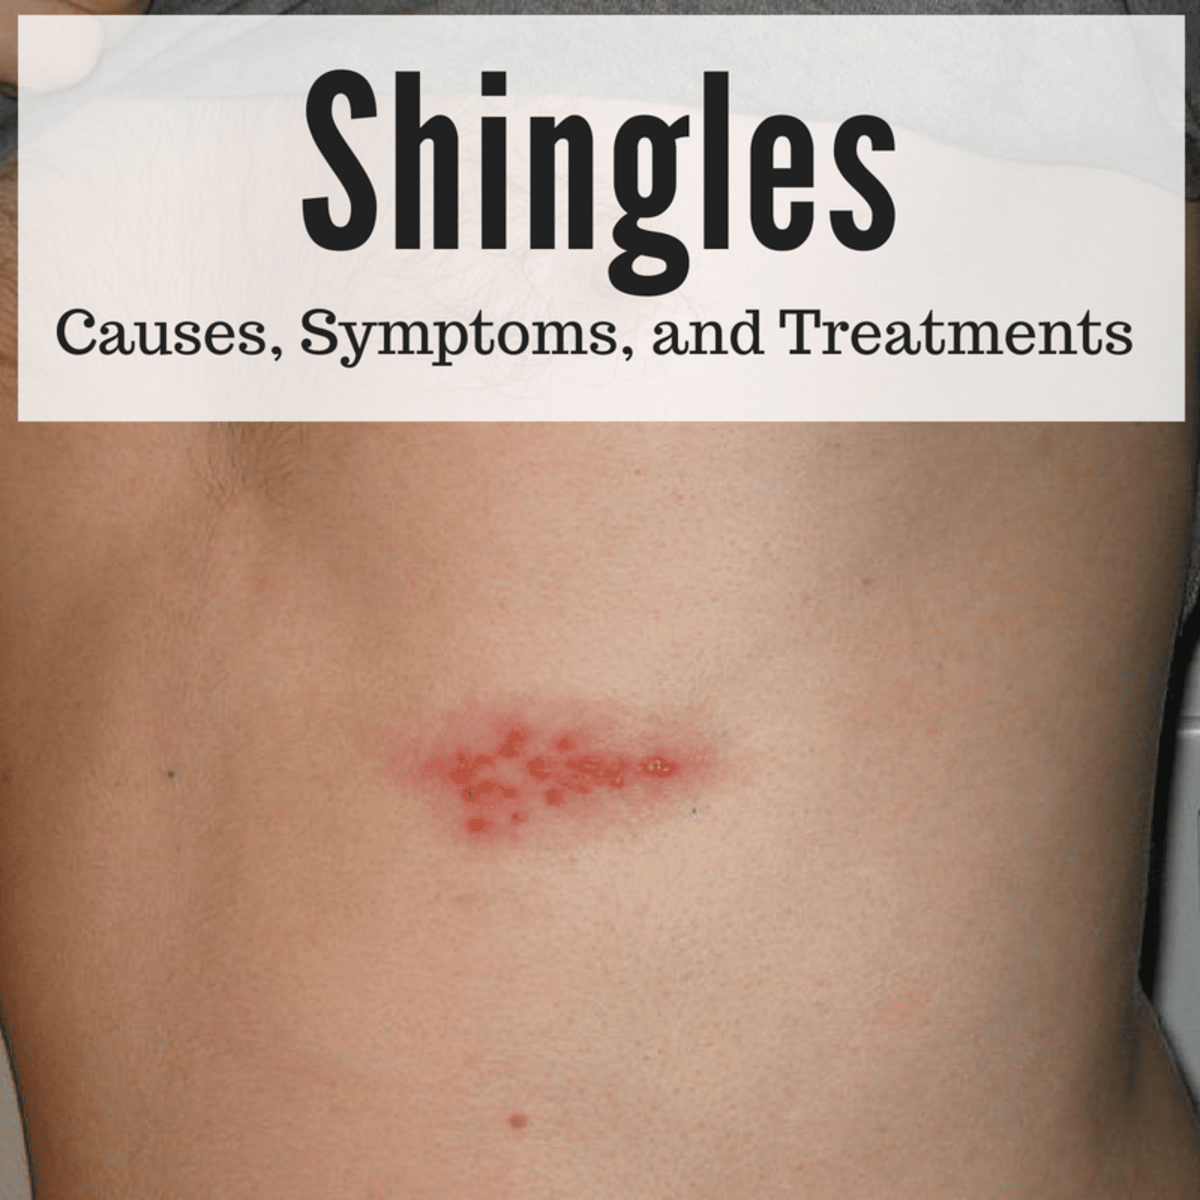 Shingles: A Serious and Painful Disease